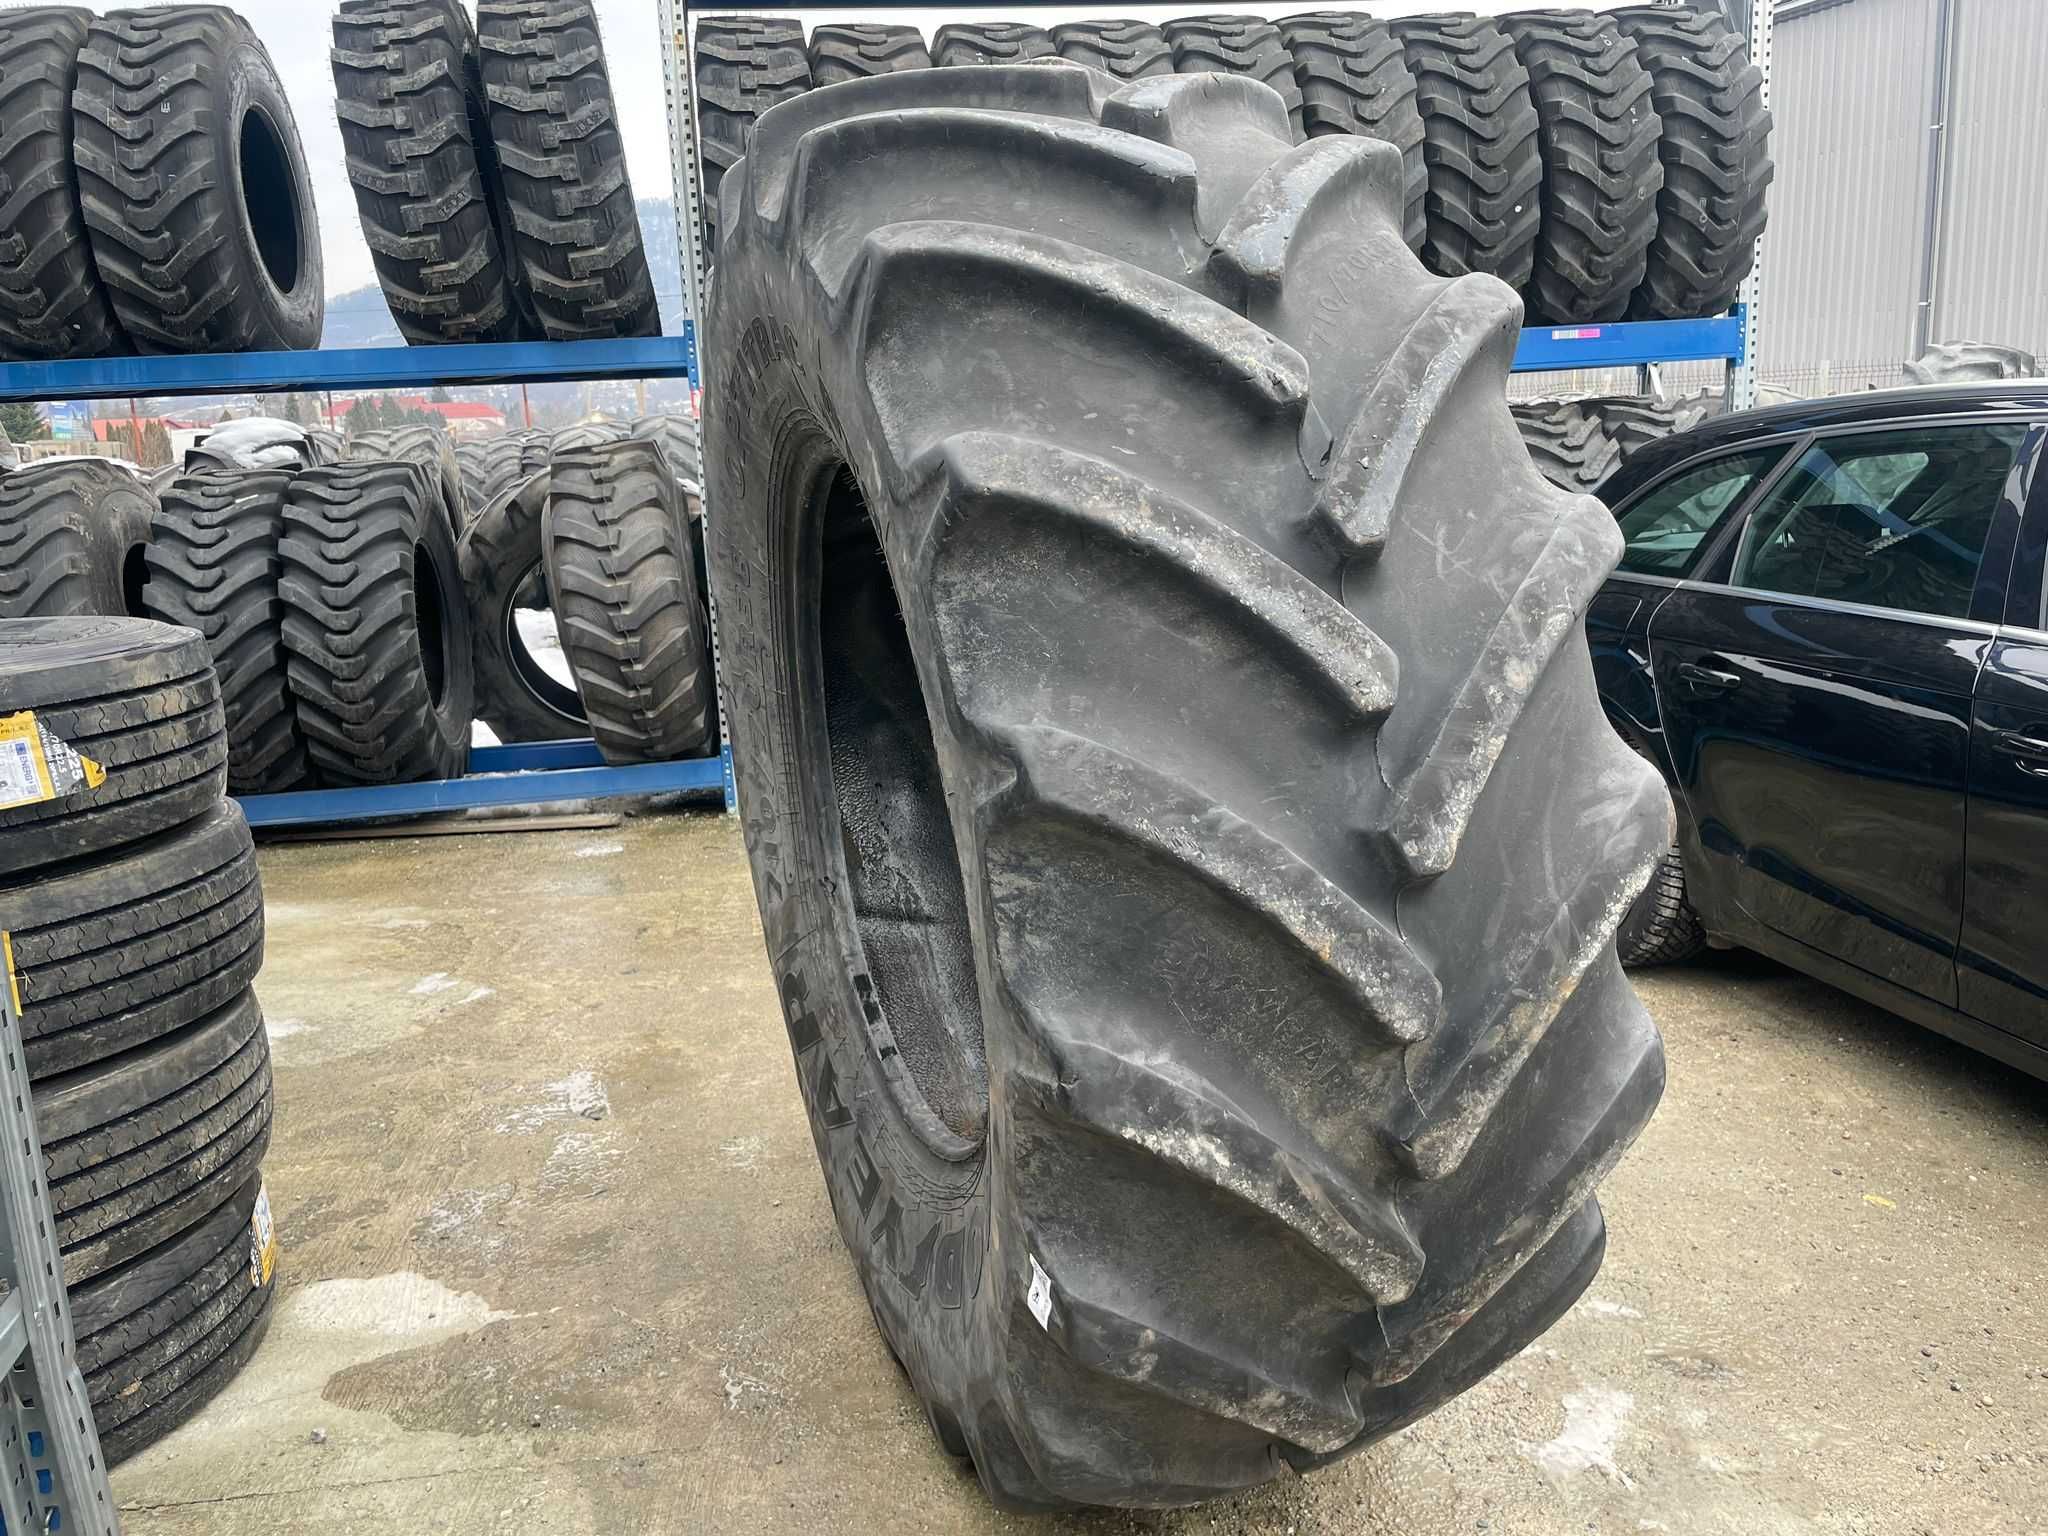 710/70R38 anvelope radiale goodyear cauciucuri agricole second hand